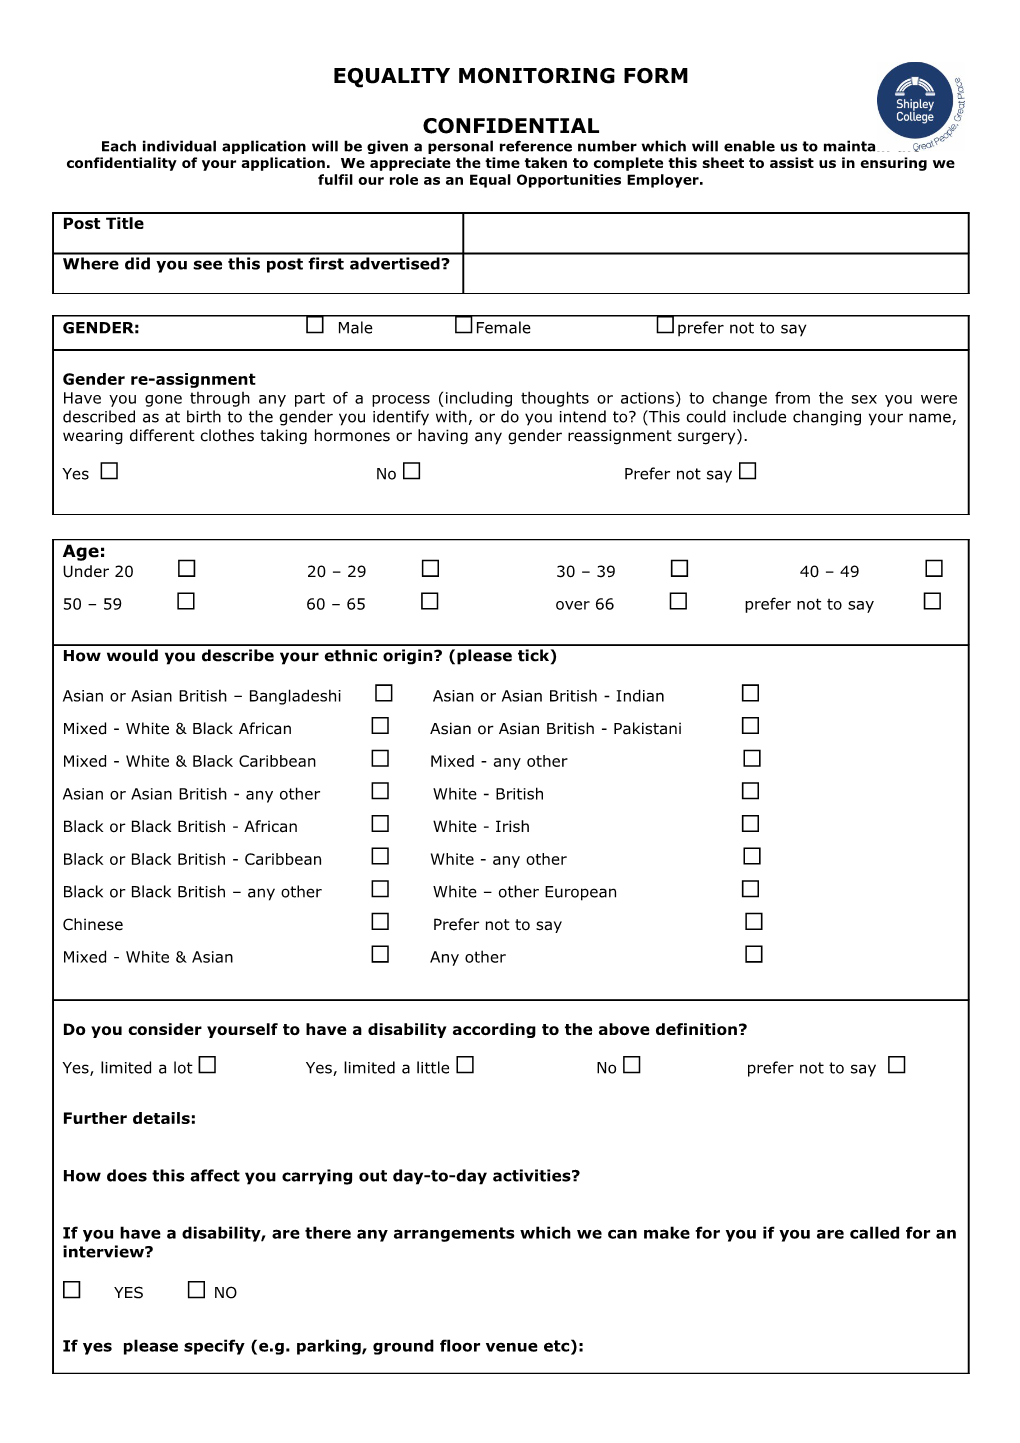 Equality Monitoring Form - Completion Guidance